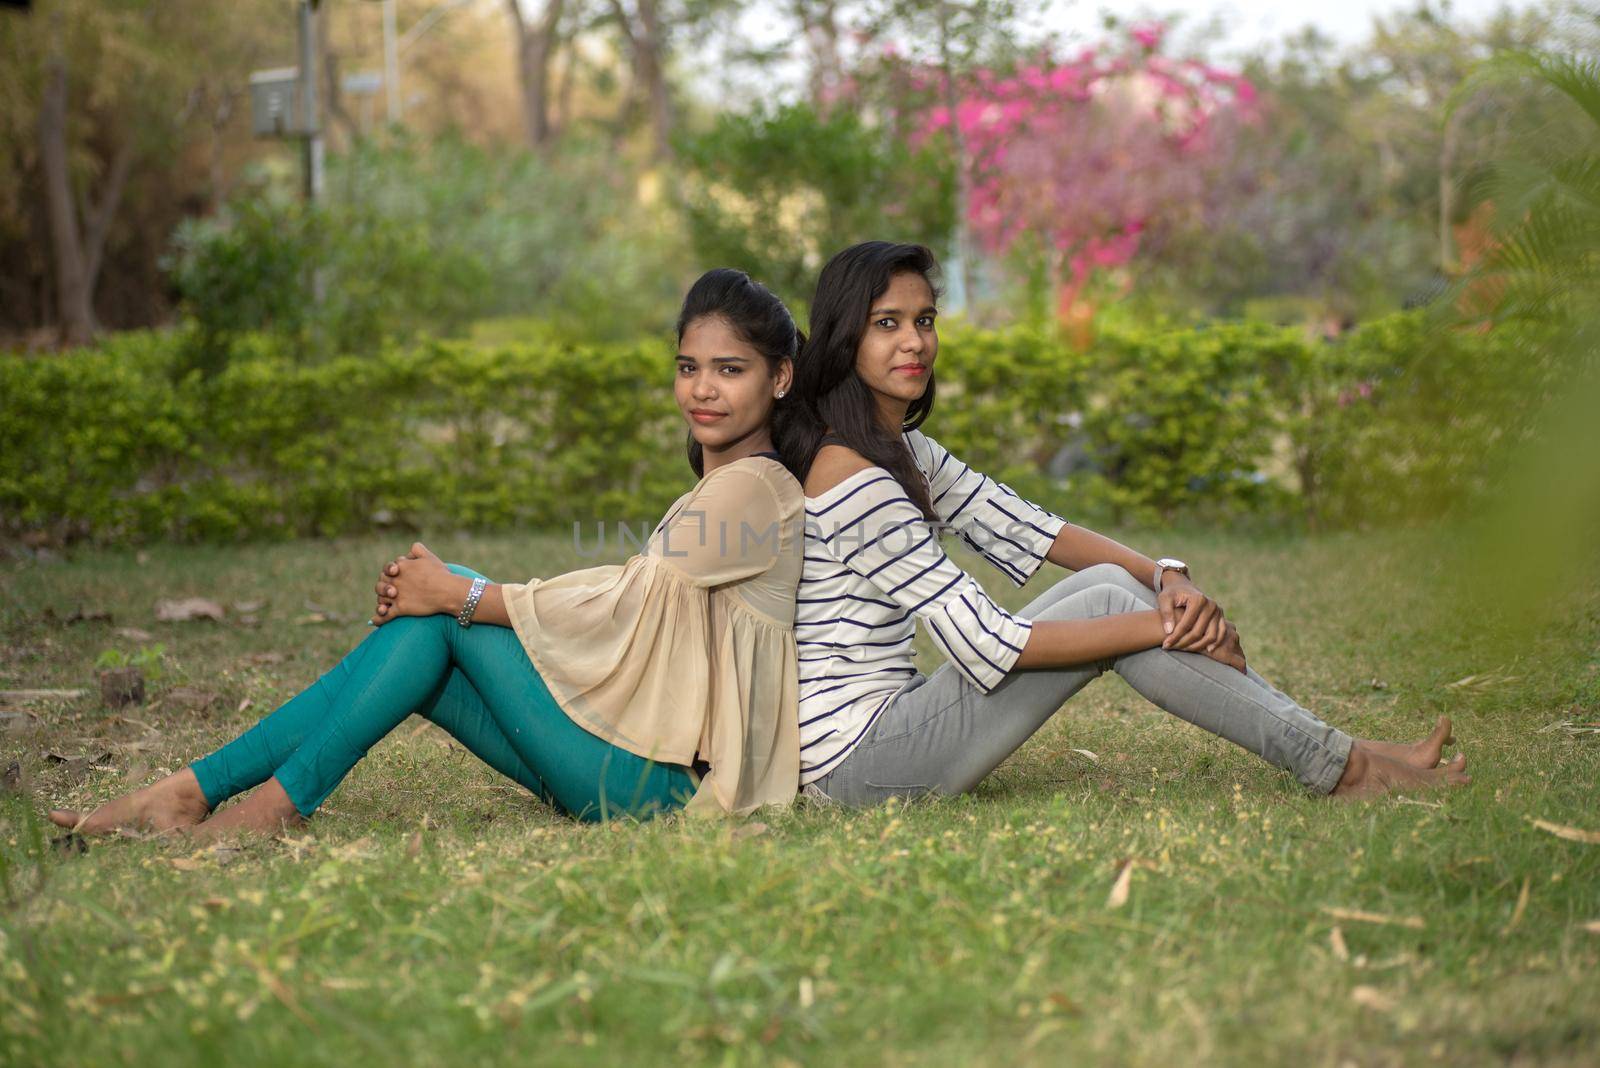 Two young girl friends having fun together in outdoors. Looking at camera.